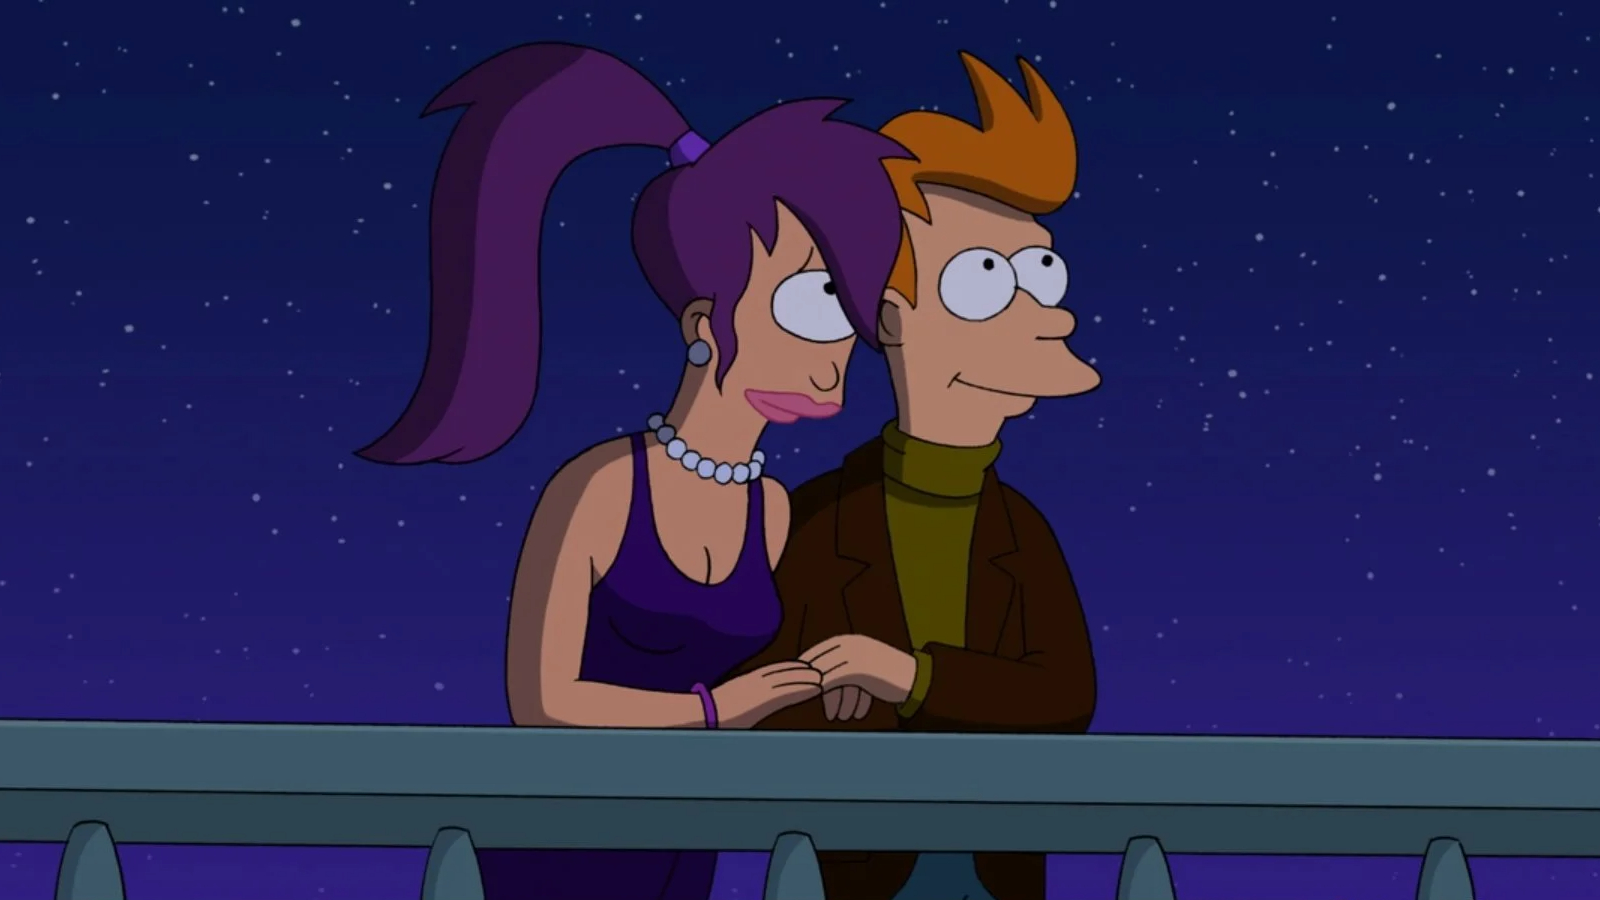 Fry and Leela holding hands in Futurama.